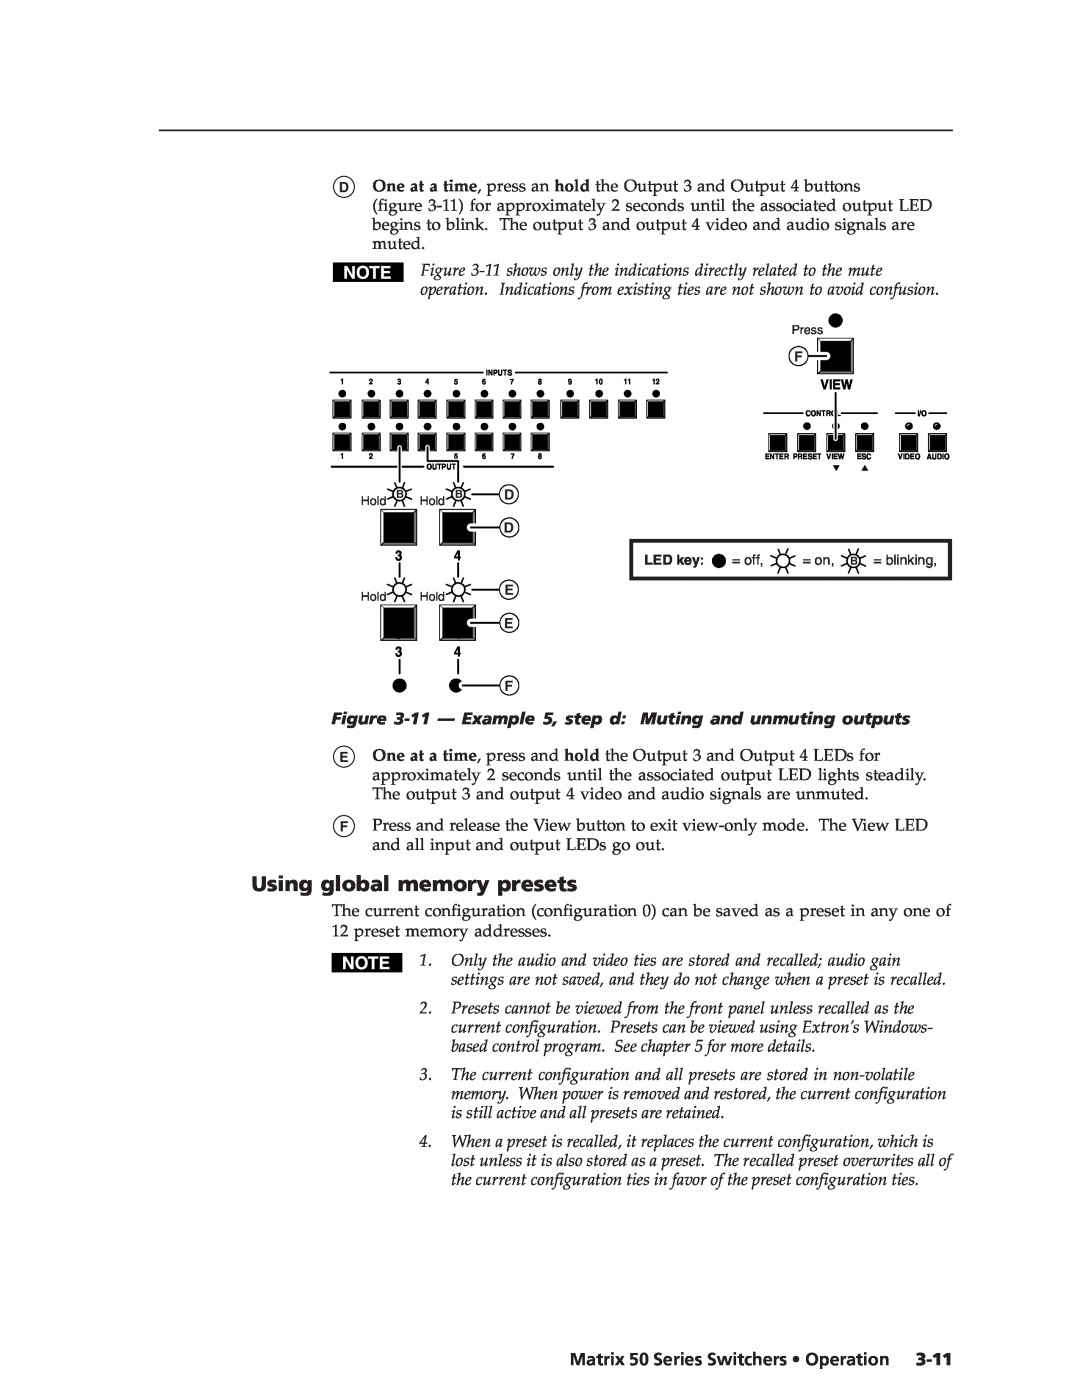 Extron electronic 50 manual Using global memory presets, 11 - Example 5, step d Muting and unmuting outputs 